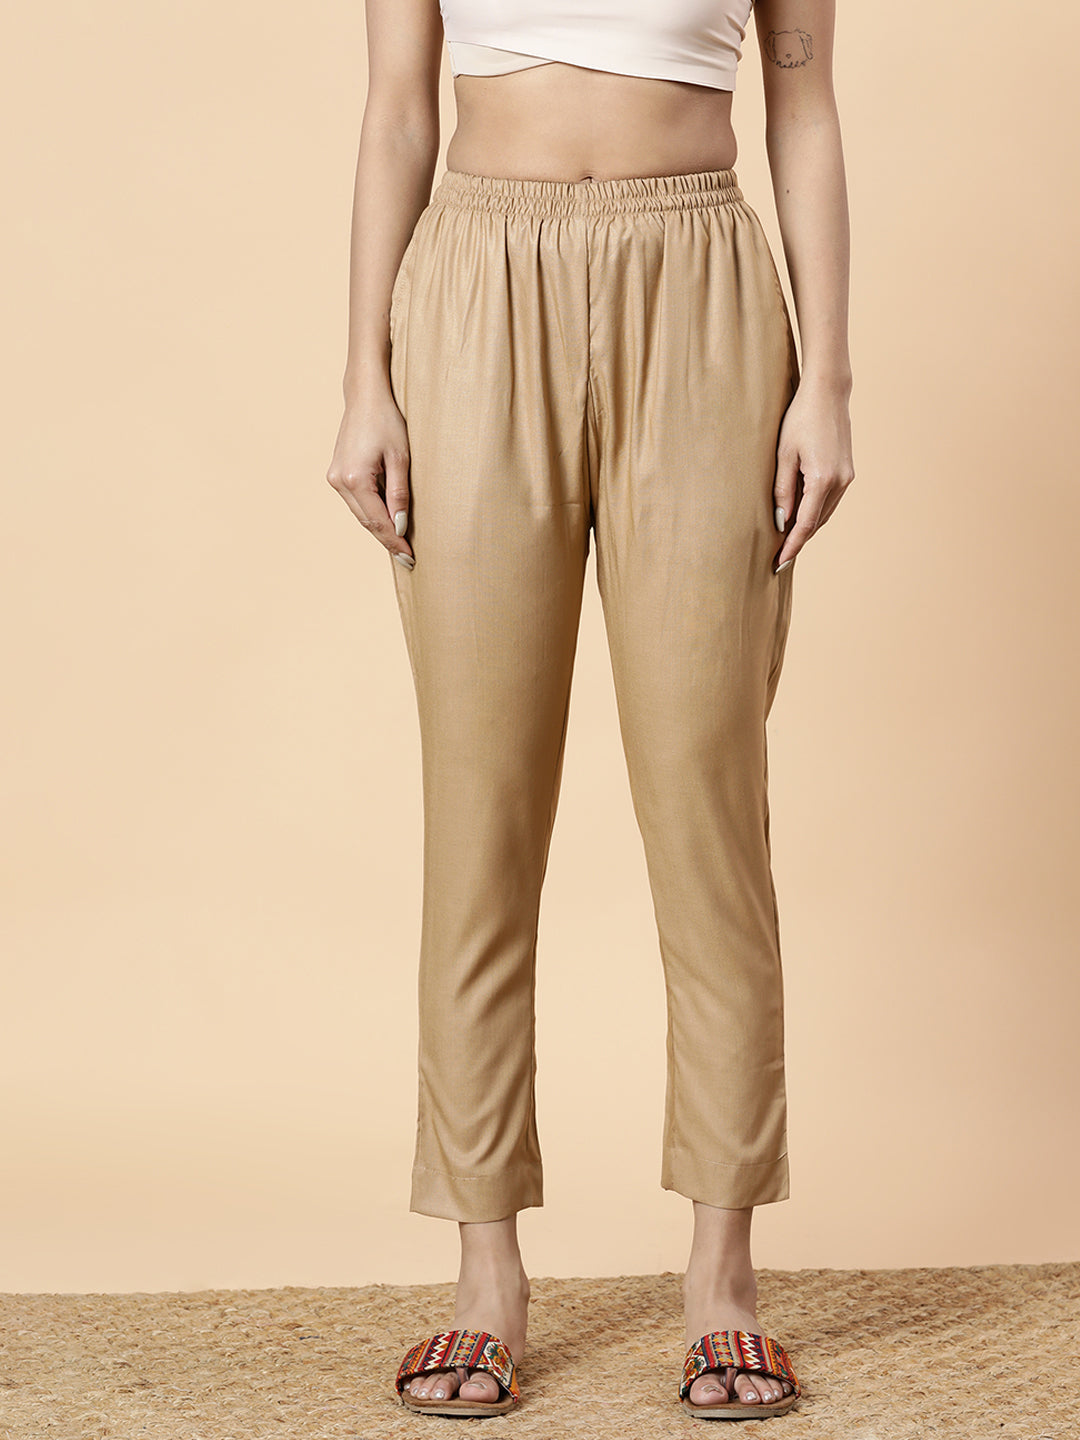 Buy Beige Ankle Length Pant Rayon for Best Price, Reviews, Free Shipping